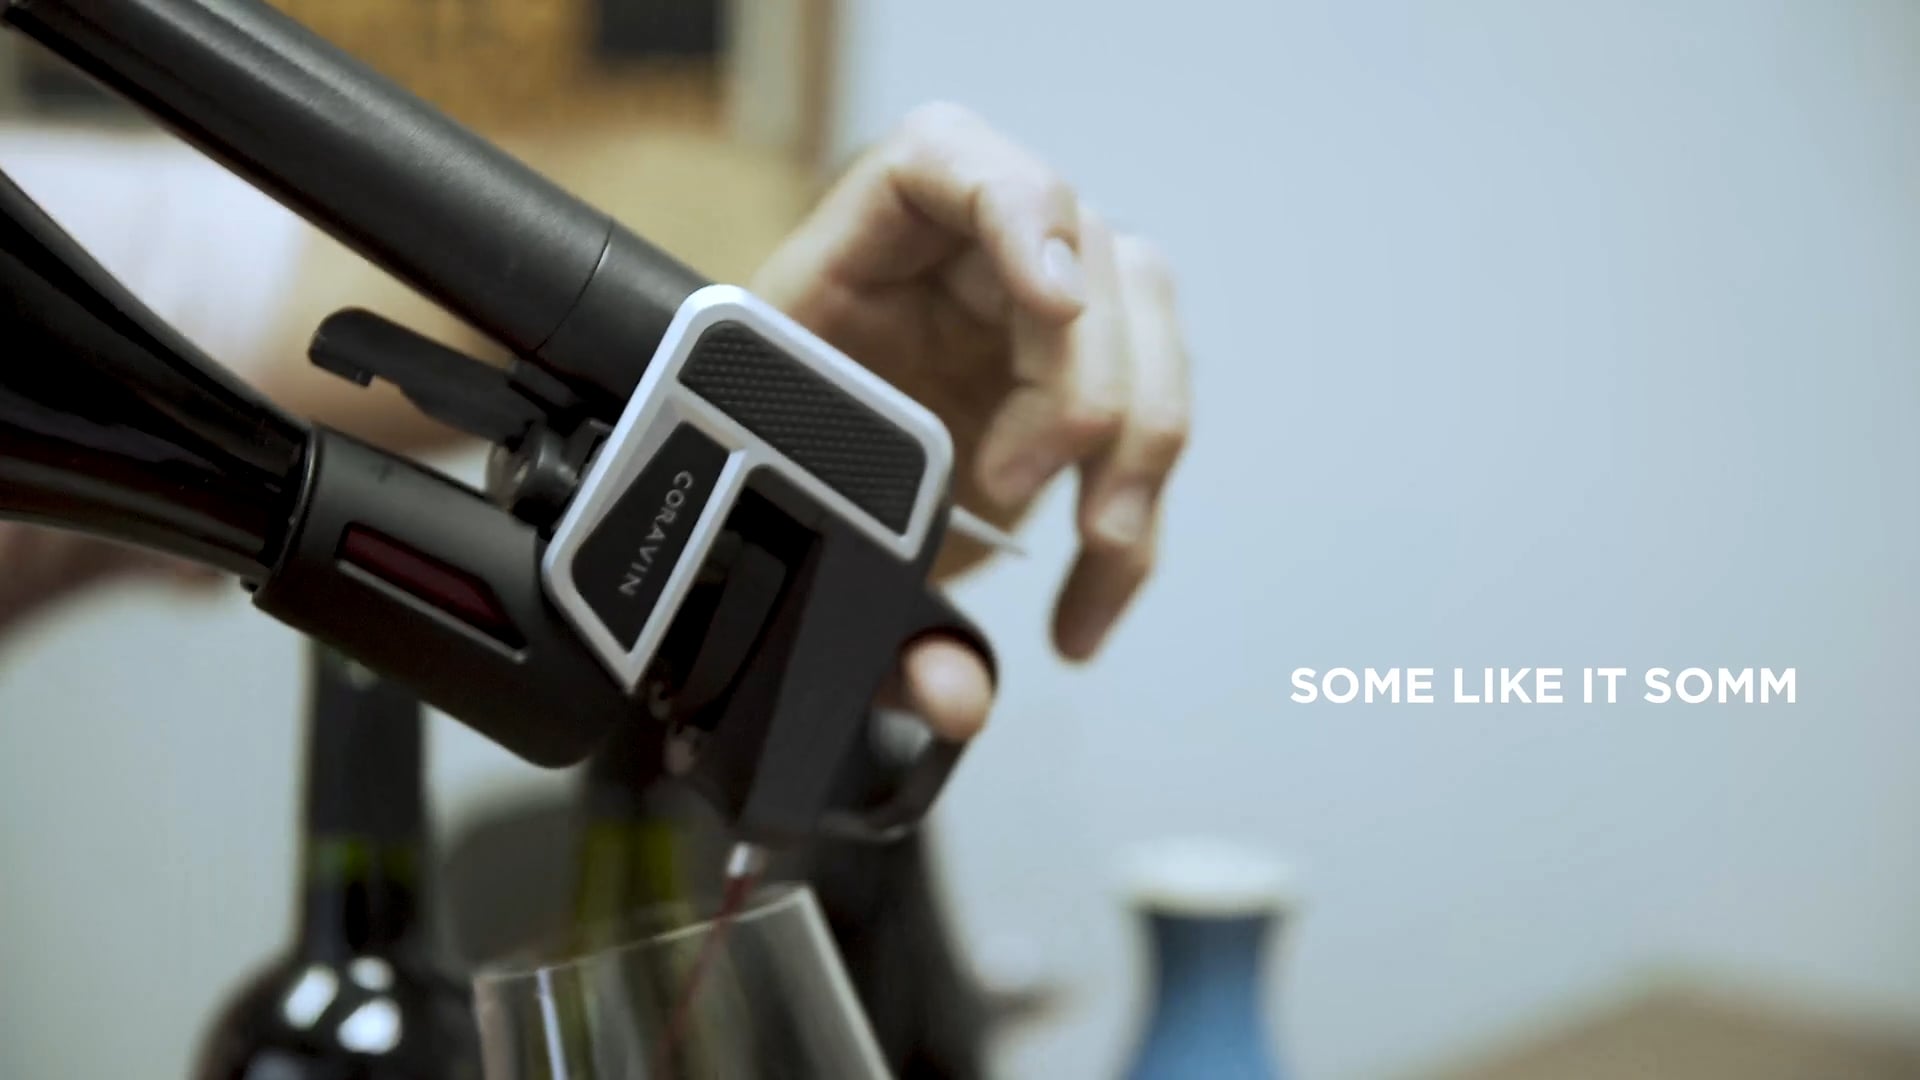 SOME LIKE IT SOMM: Episode 2 - Price to Quality